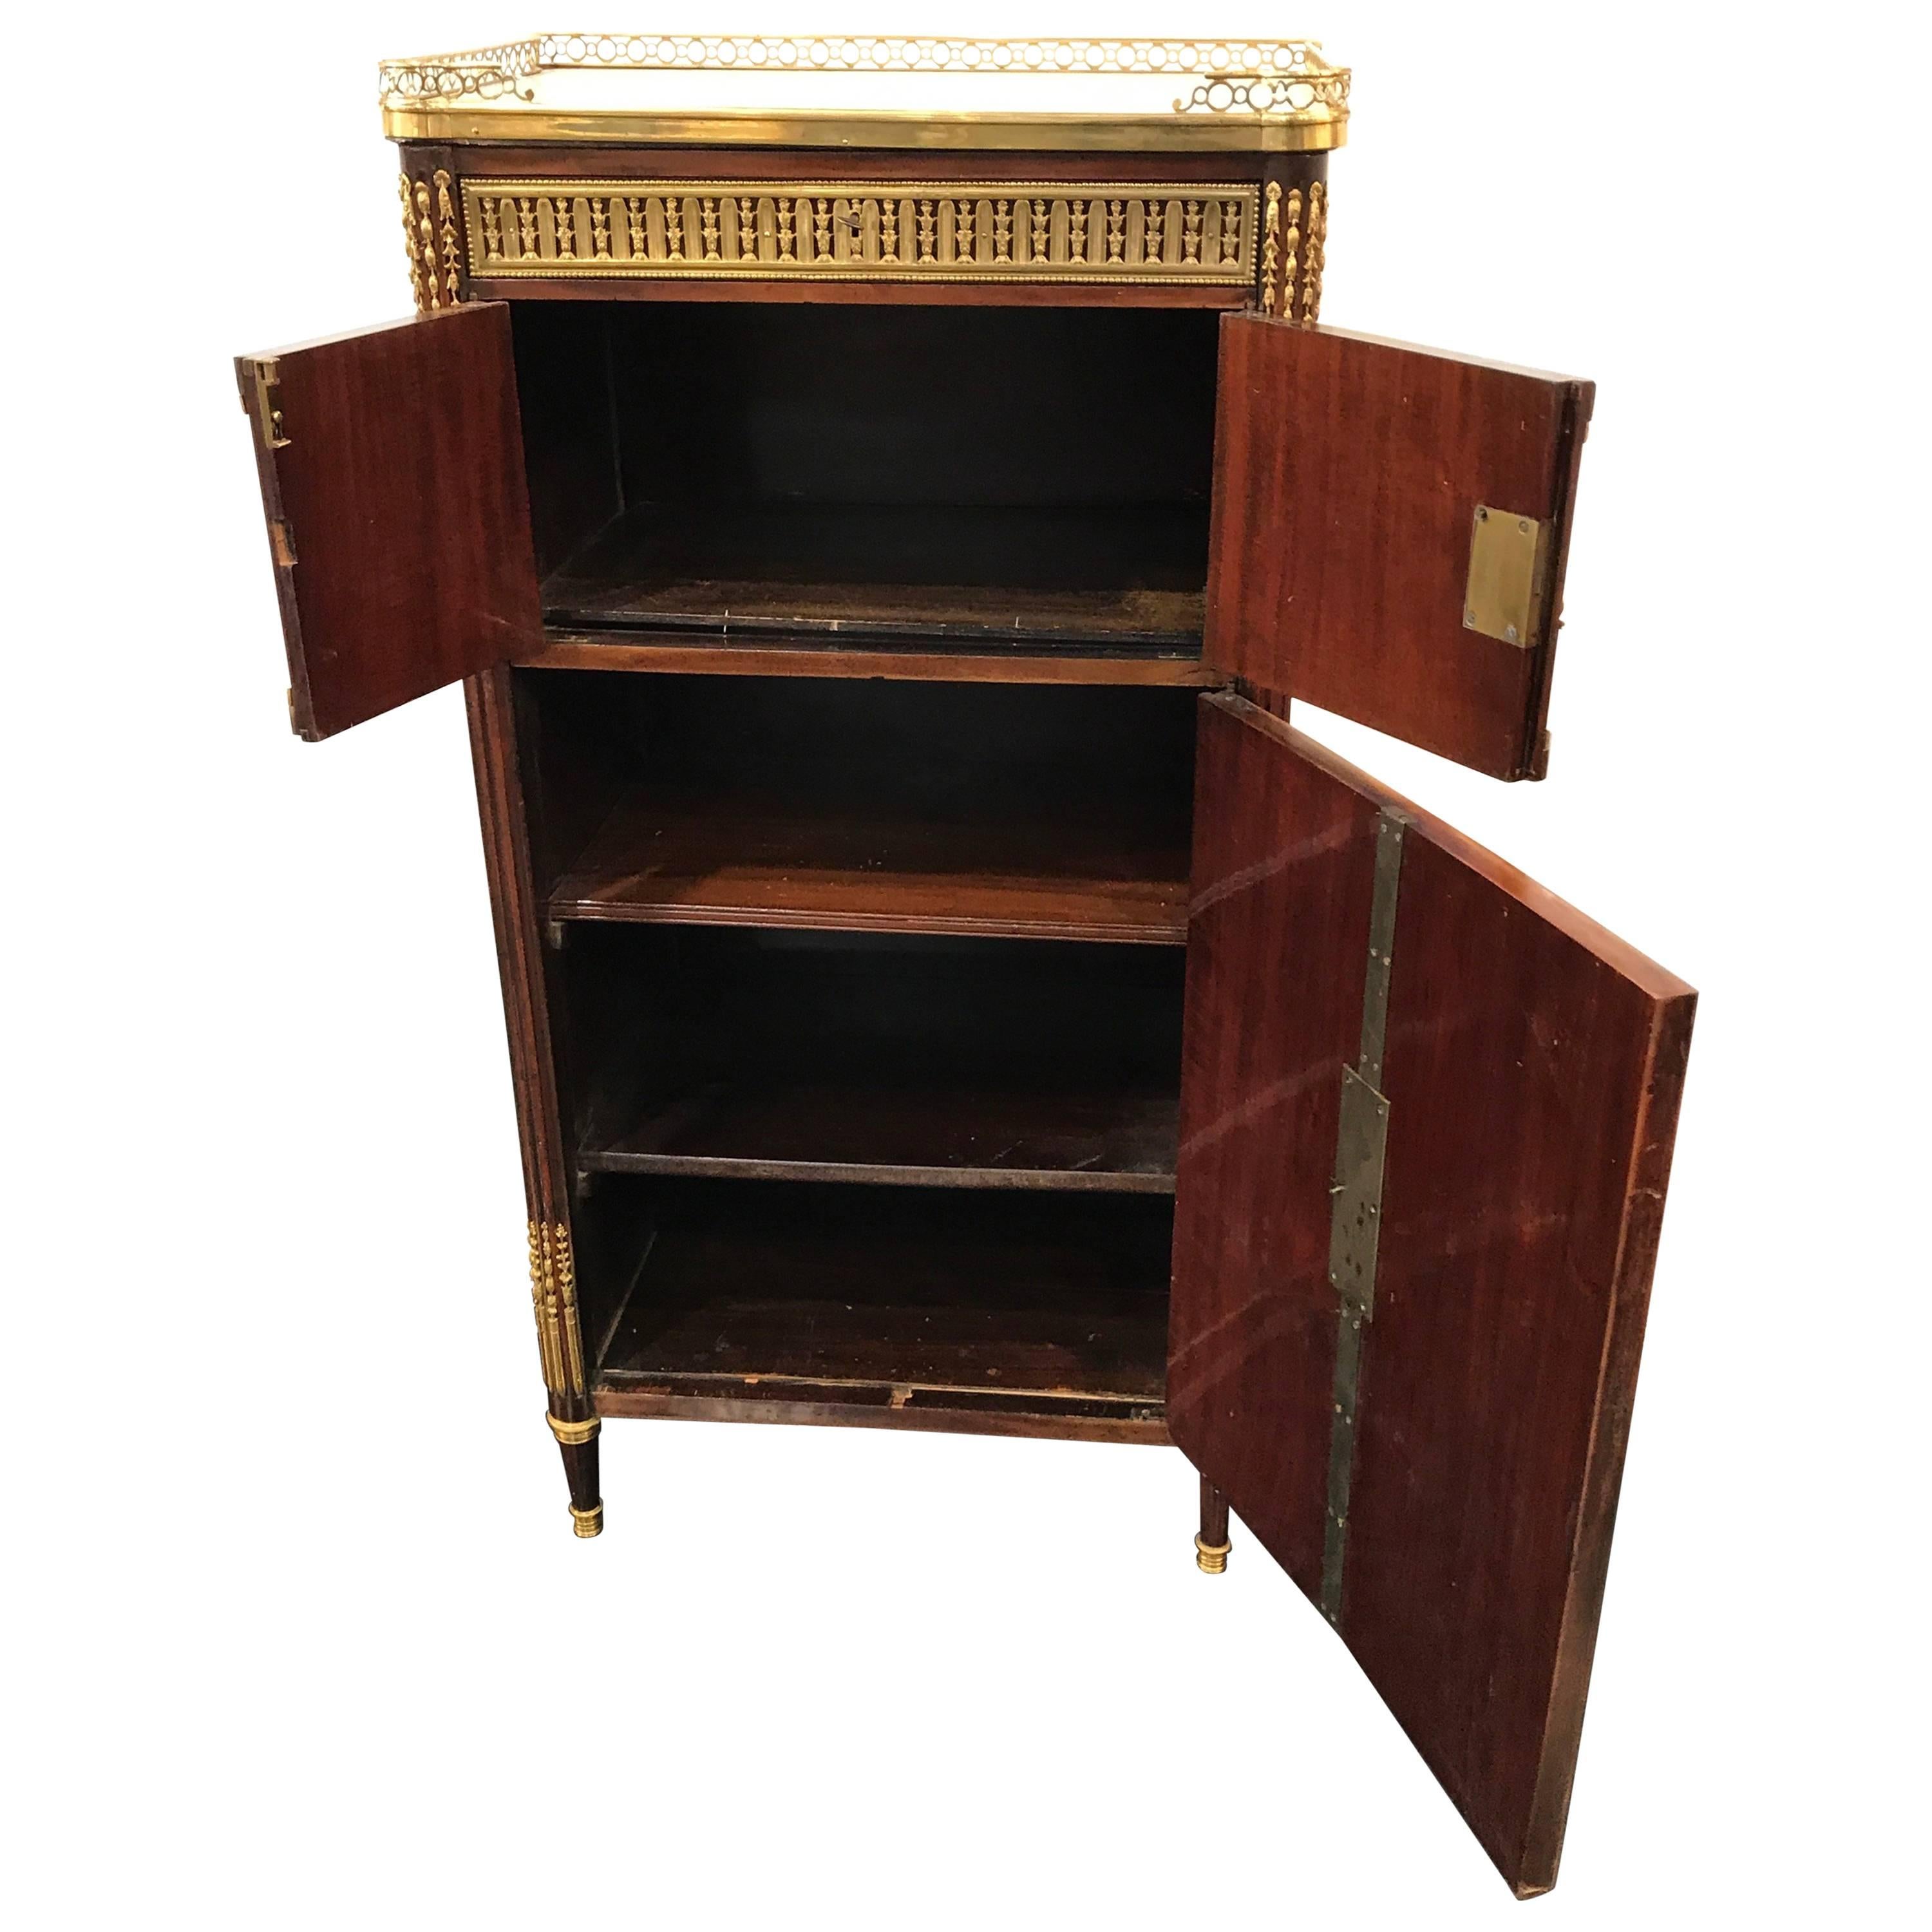 Louis XVI style cabinet, France, 1880, mahogany veneer with exquisite bronze mounts. In very good condition. The cabinet will be shipped from Germany. Standard shipping costs to Boston are included.